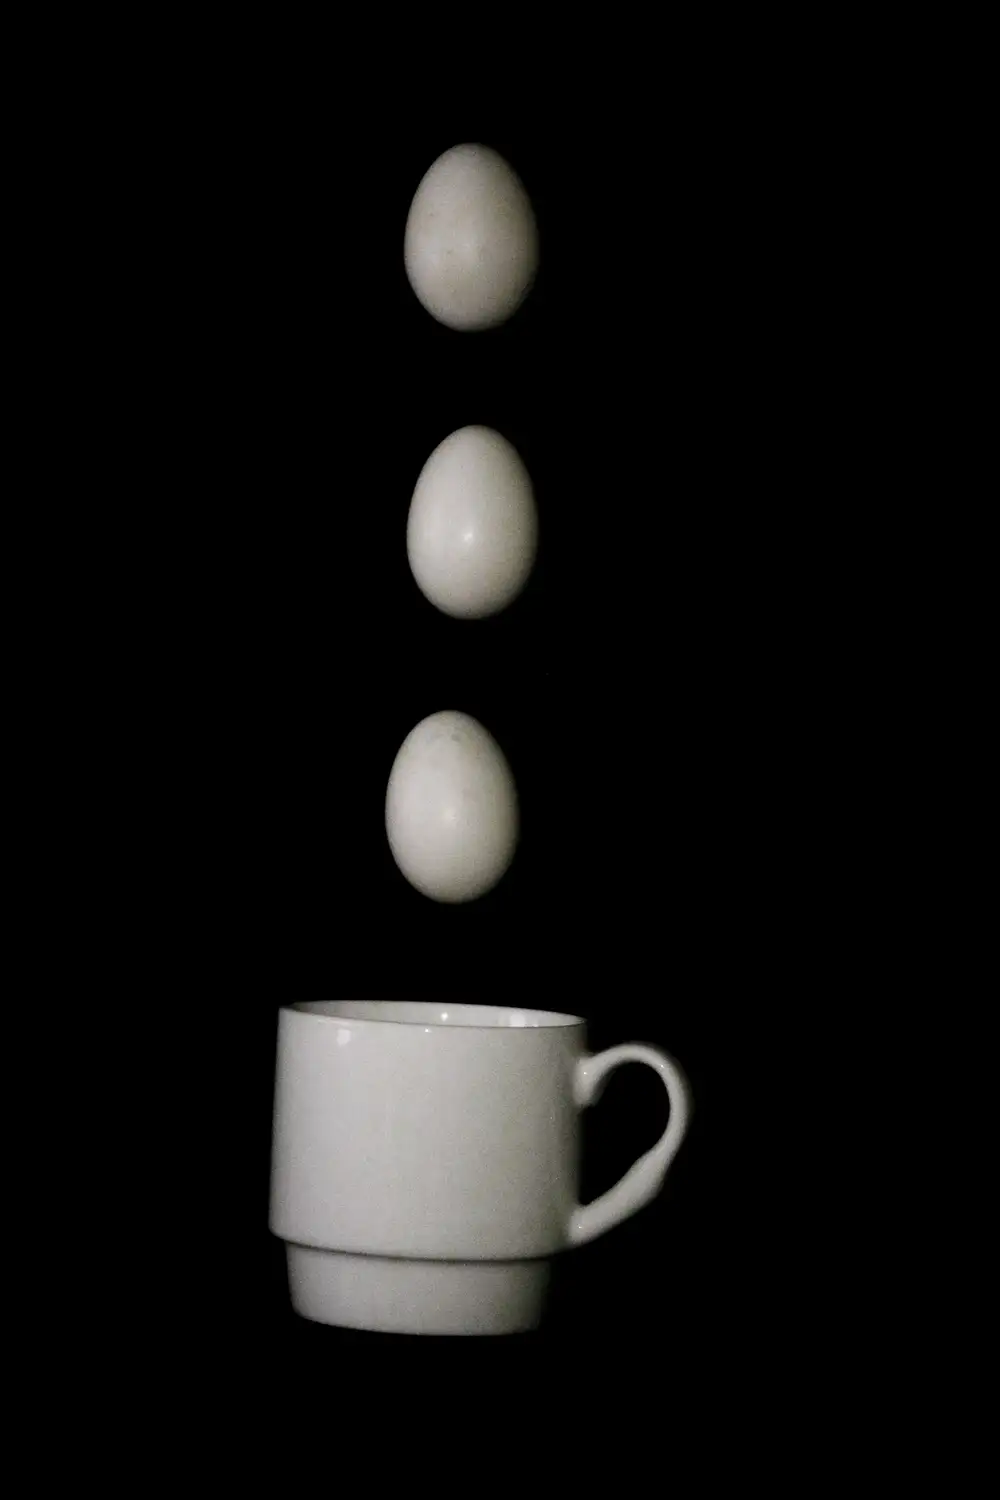 Dropping eggs in a cup